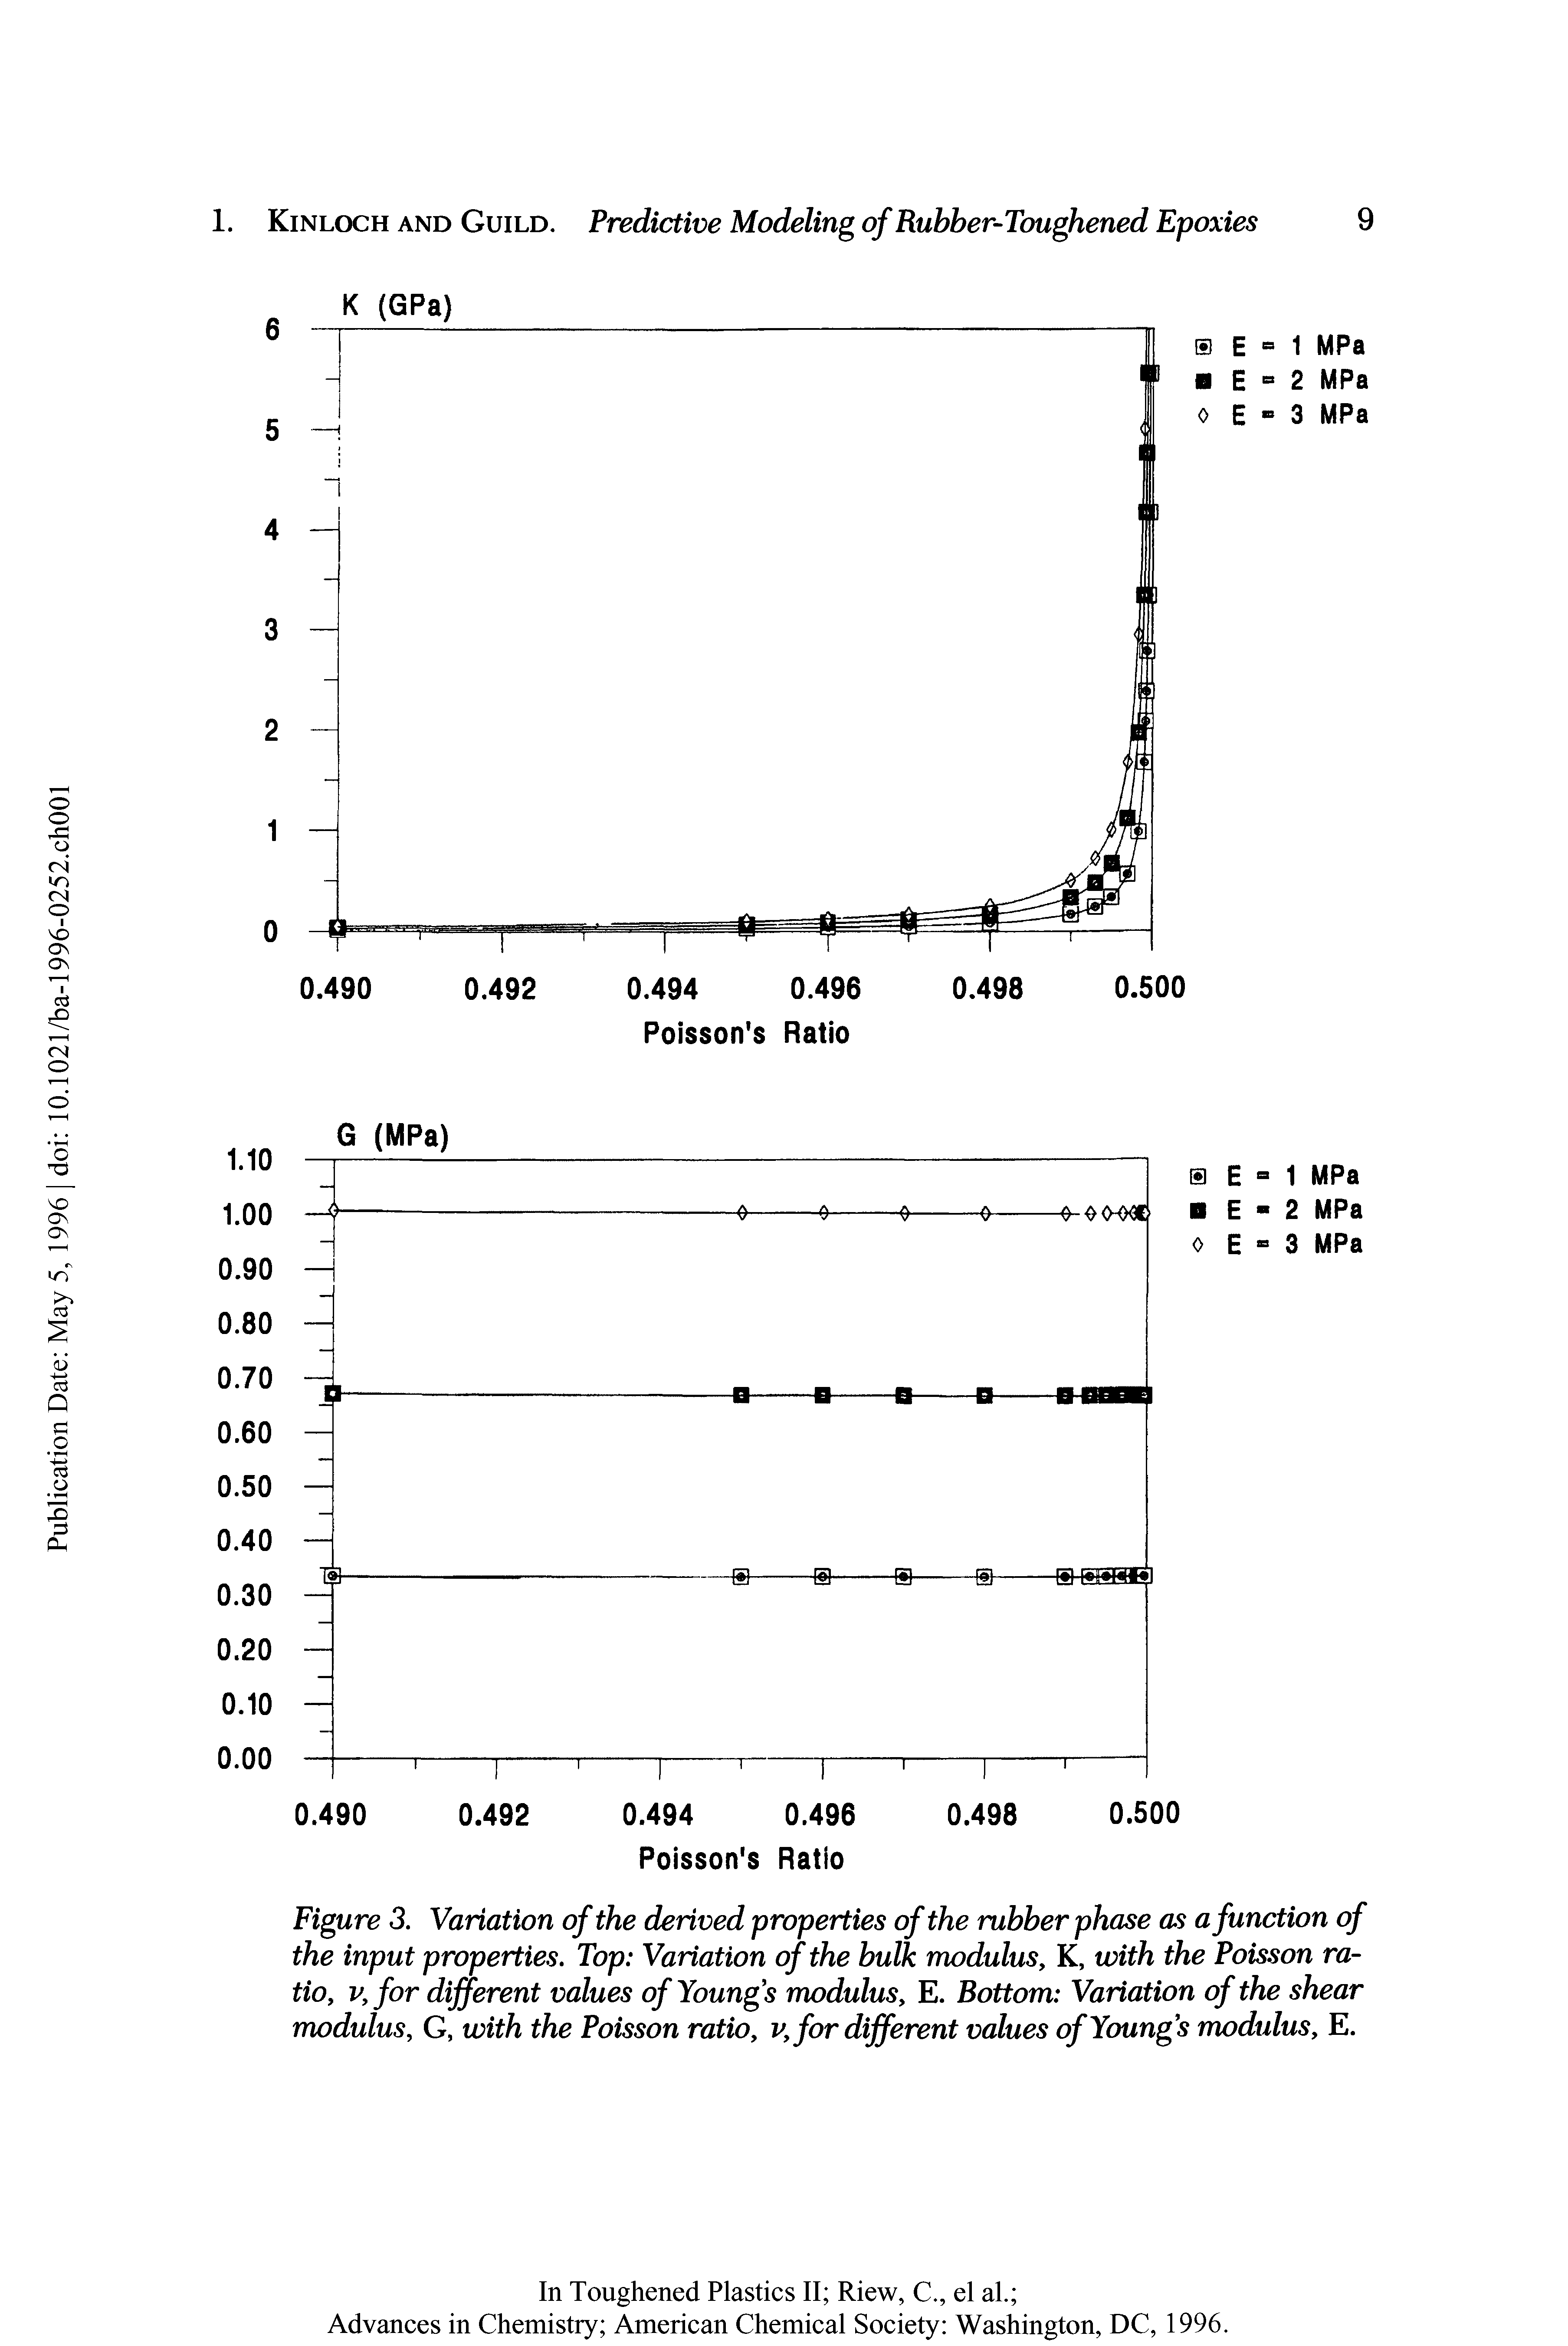 Figure 3. Variation of the derived properties of the rubber phase as a function of the input properties. Top Variation of the bulk modulus, K, with the Poisson ratio, v, for different values of Youngs modulus, E. Bottom Variation of the shear modulus, G, with the Poisson ratio, v, for different values of Youngs modulus, E.